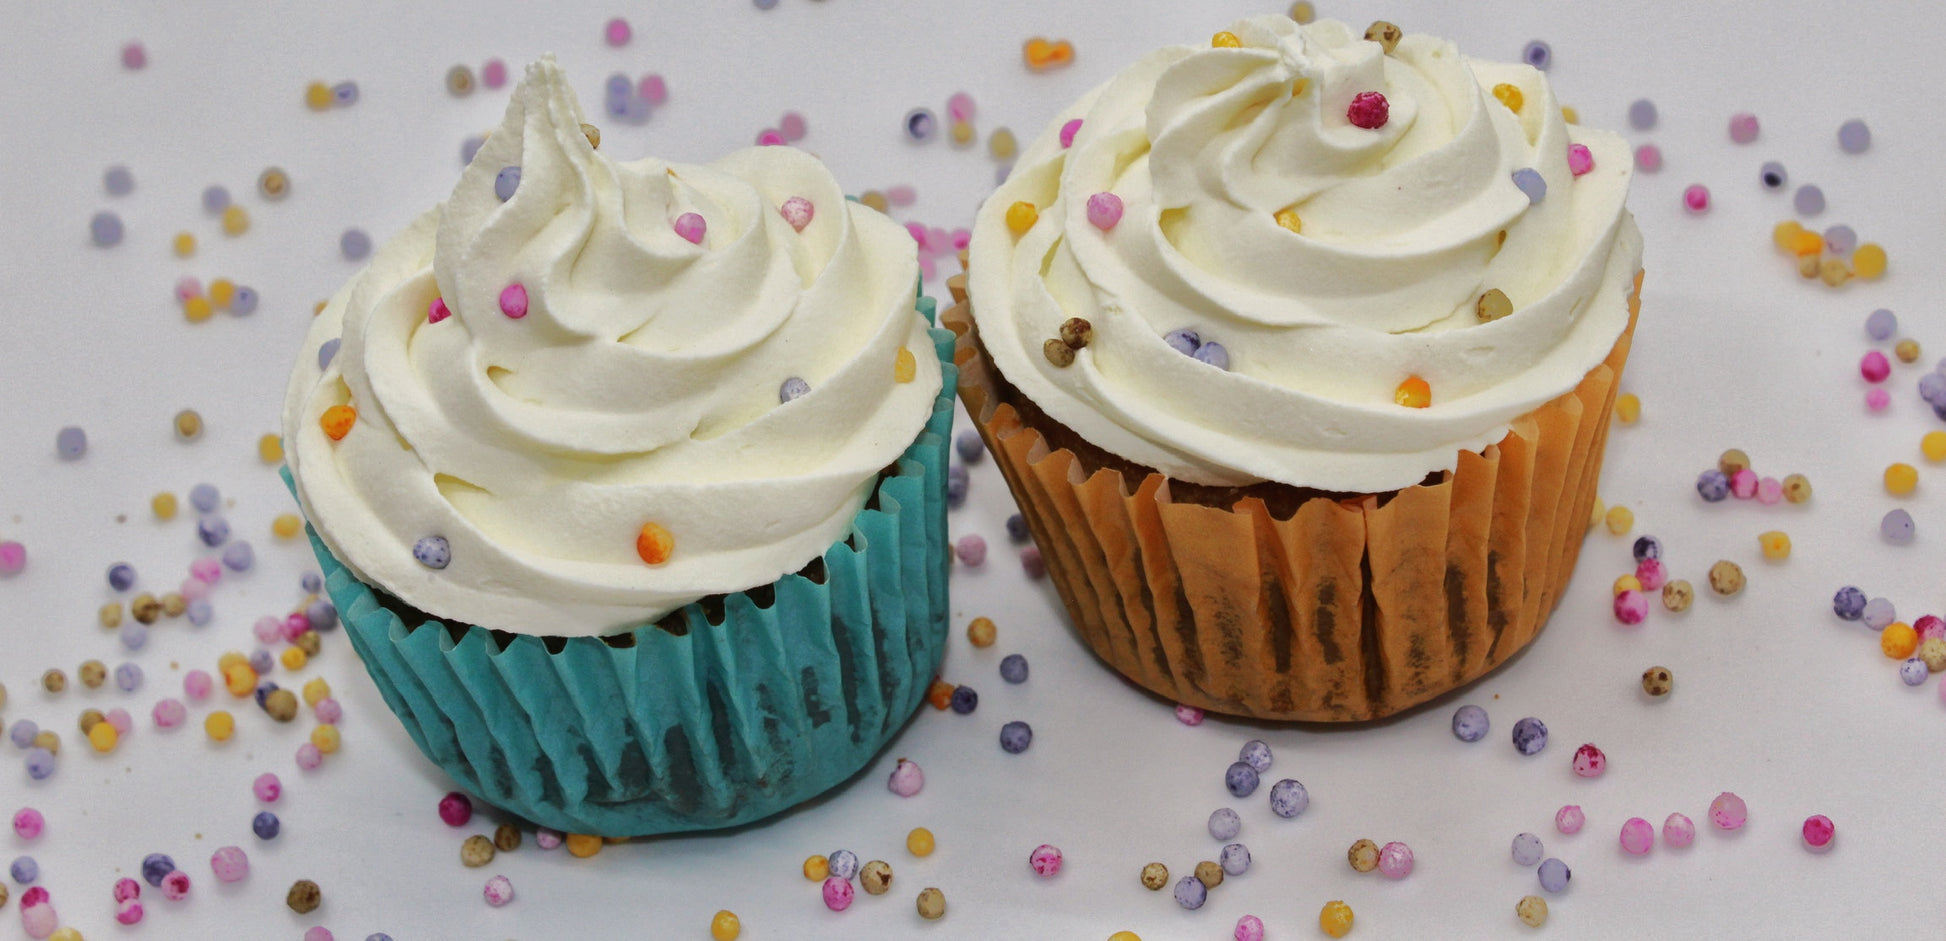 Two colorful cupcakes each wrapped in blue and orange paper liner with white swirled frosting and rainbow pearl sprinkles on top. There are rainbow pearl sprinkles scattered throughout the background.